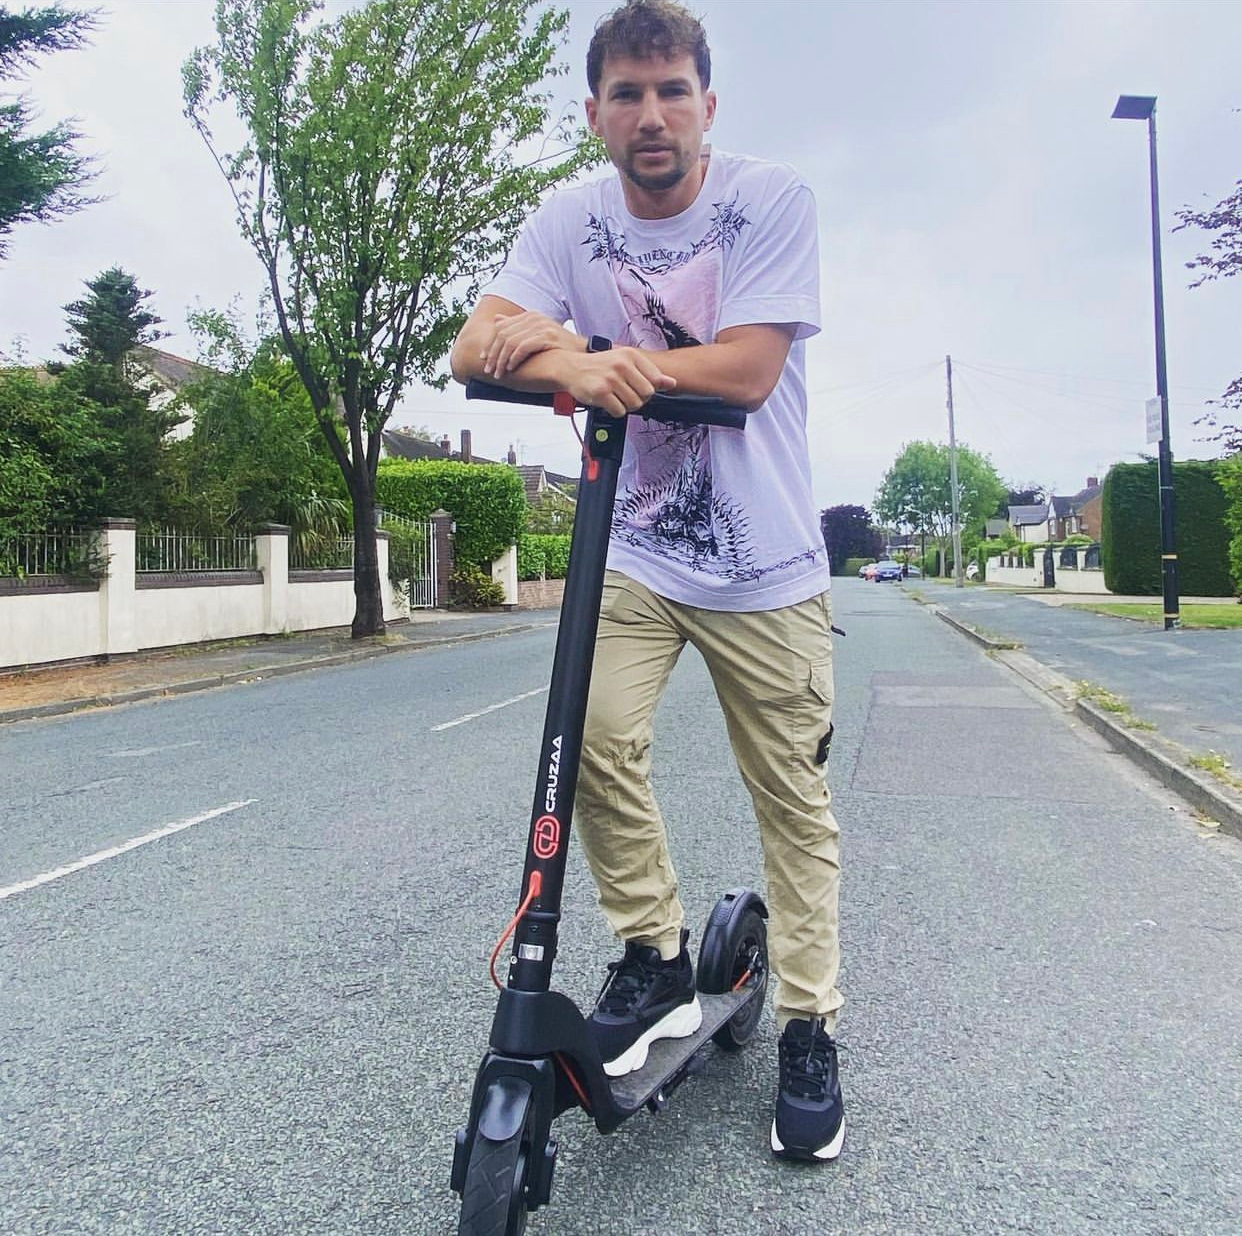 The Official Cruzaa Commuta E-Scooter 45km Range - 25kmh Top Speed - ships from Germany